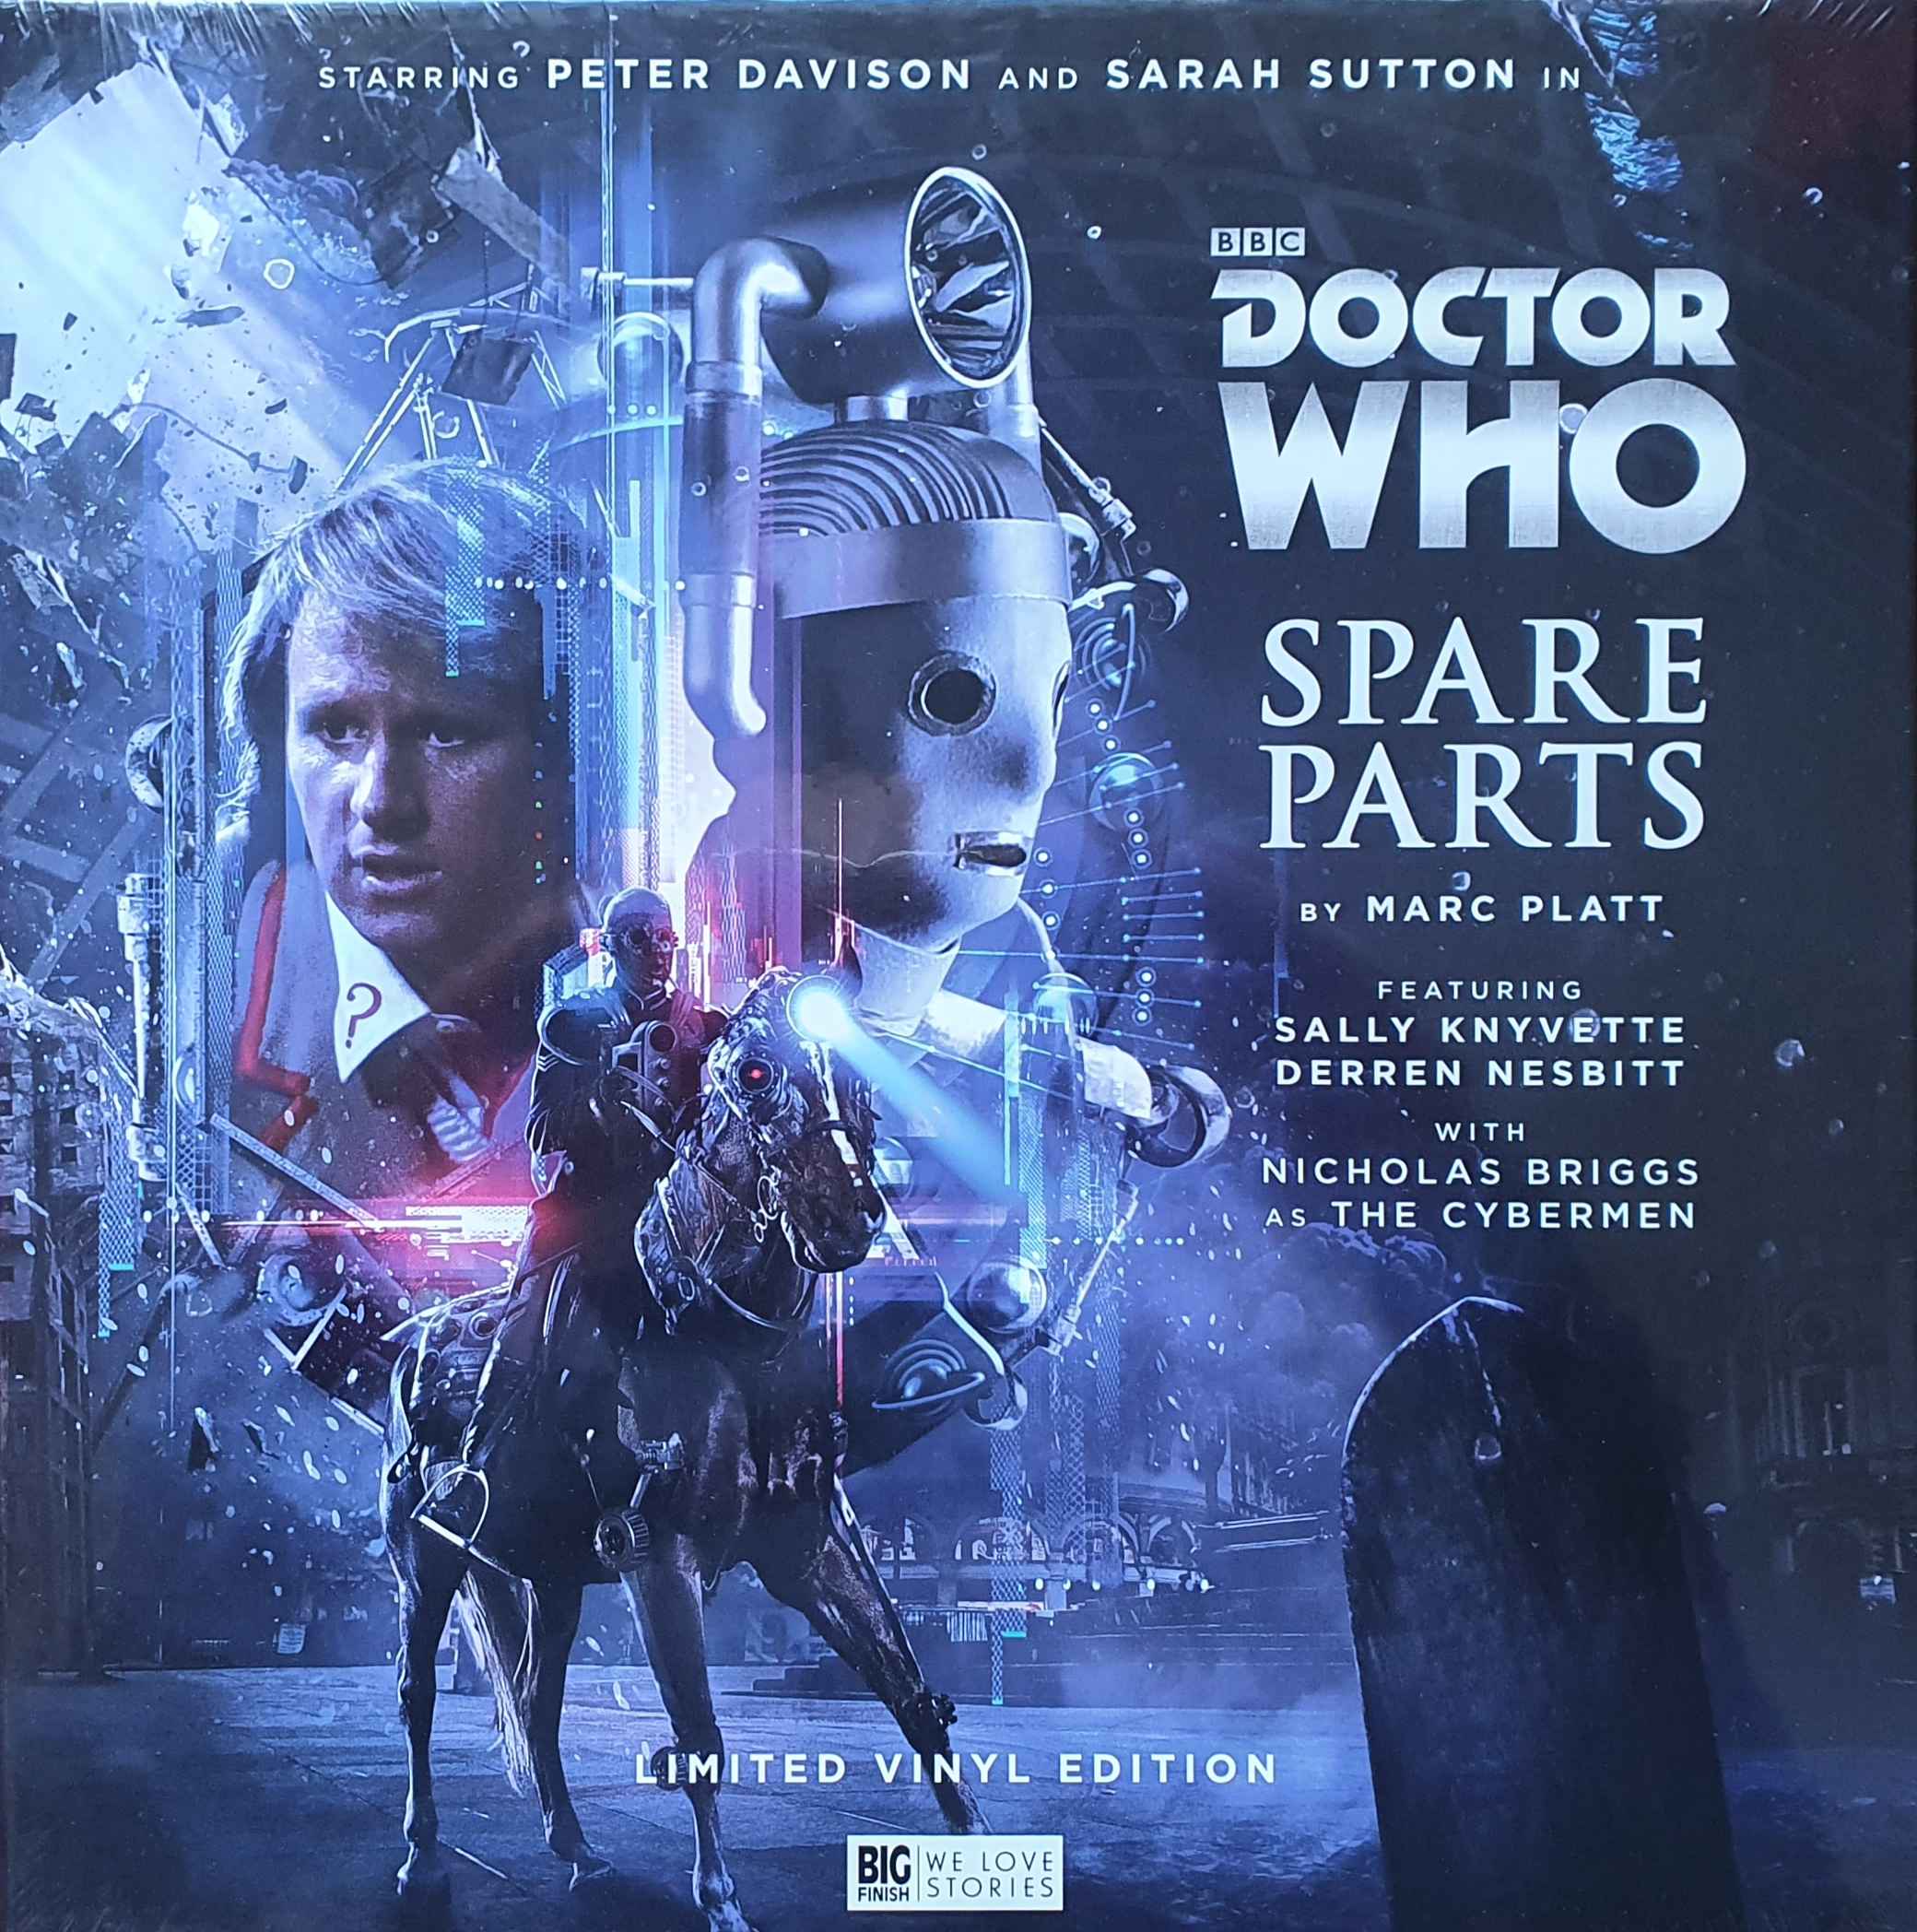 Picture of Doctor Who - Spare parts by artist Marc Platt from the BBC albums - Records and Tapes library